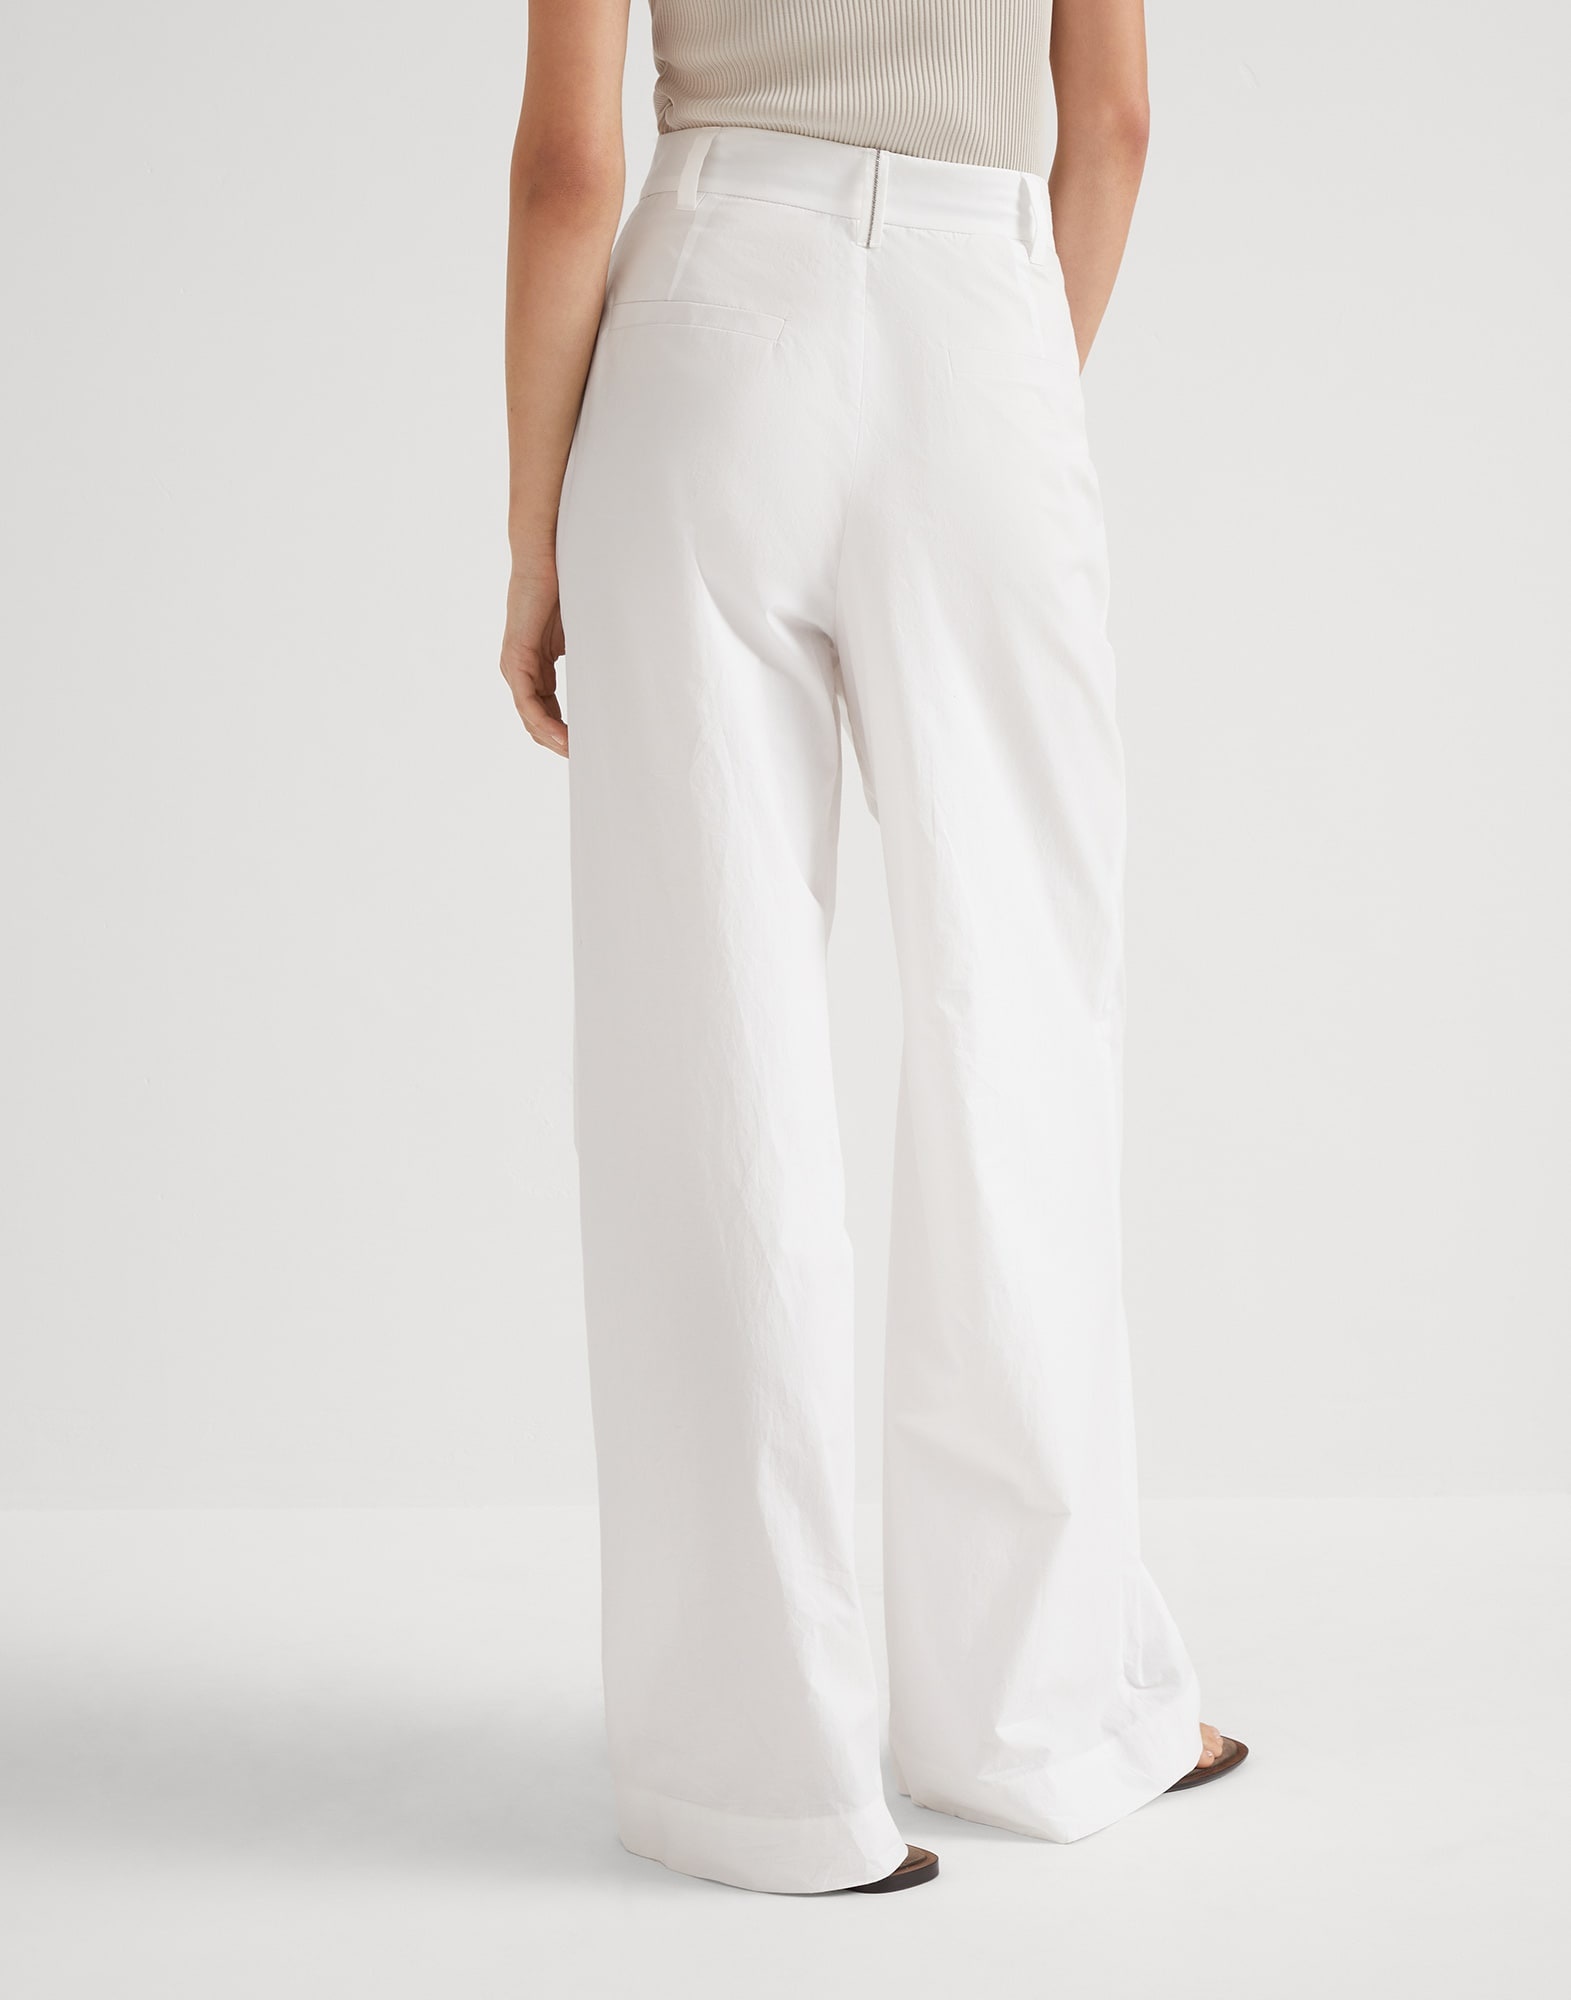 Lightweight wrinkled cotton poplin baggy wide trousers with monili - 2